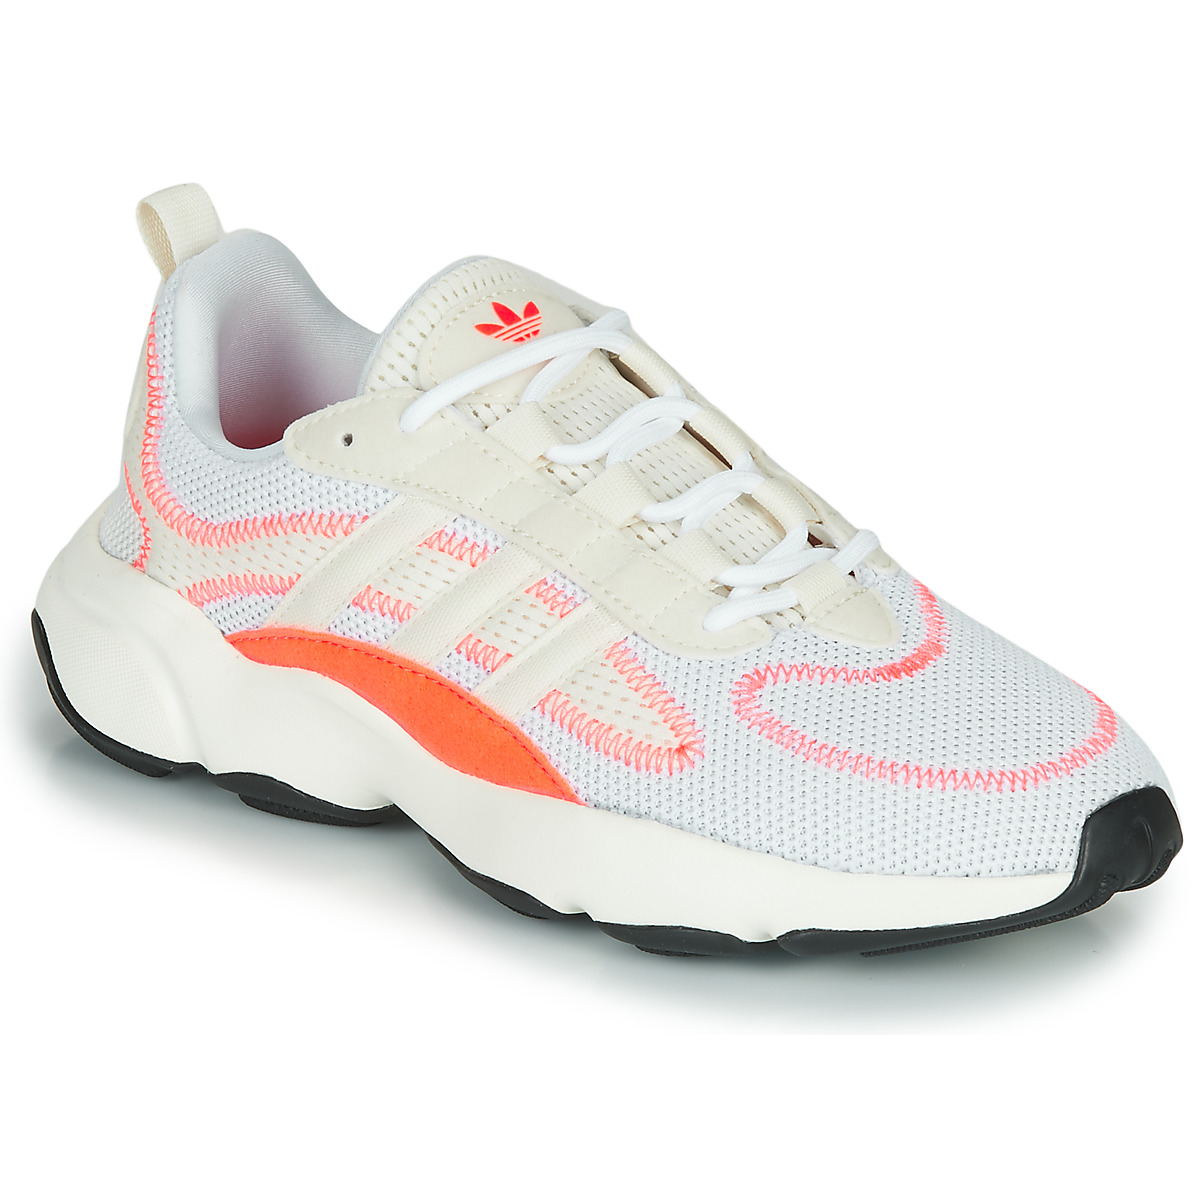 Chaussures Enfant adidas palace jobs carlsbad ca today events 2016 HAIWEE W Blanc